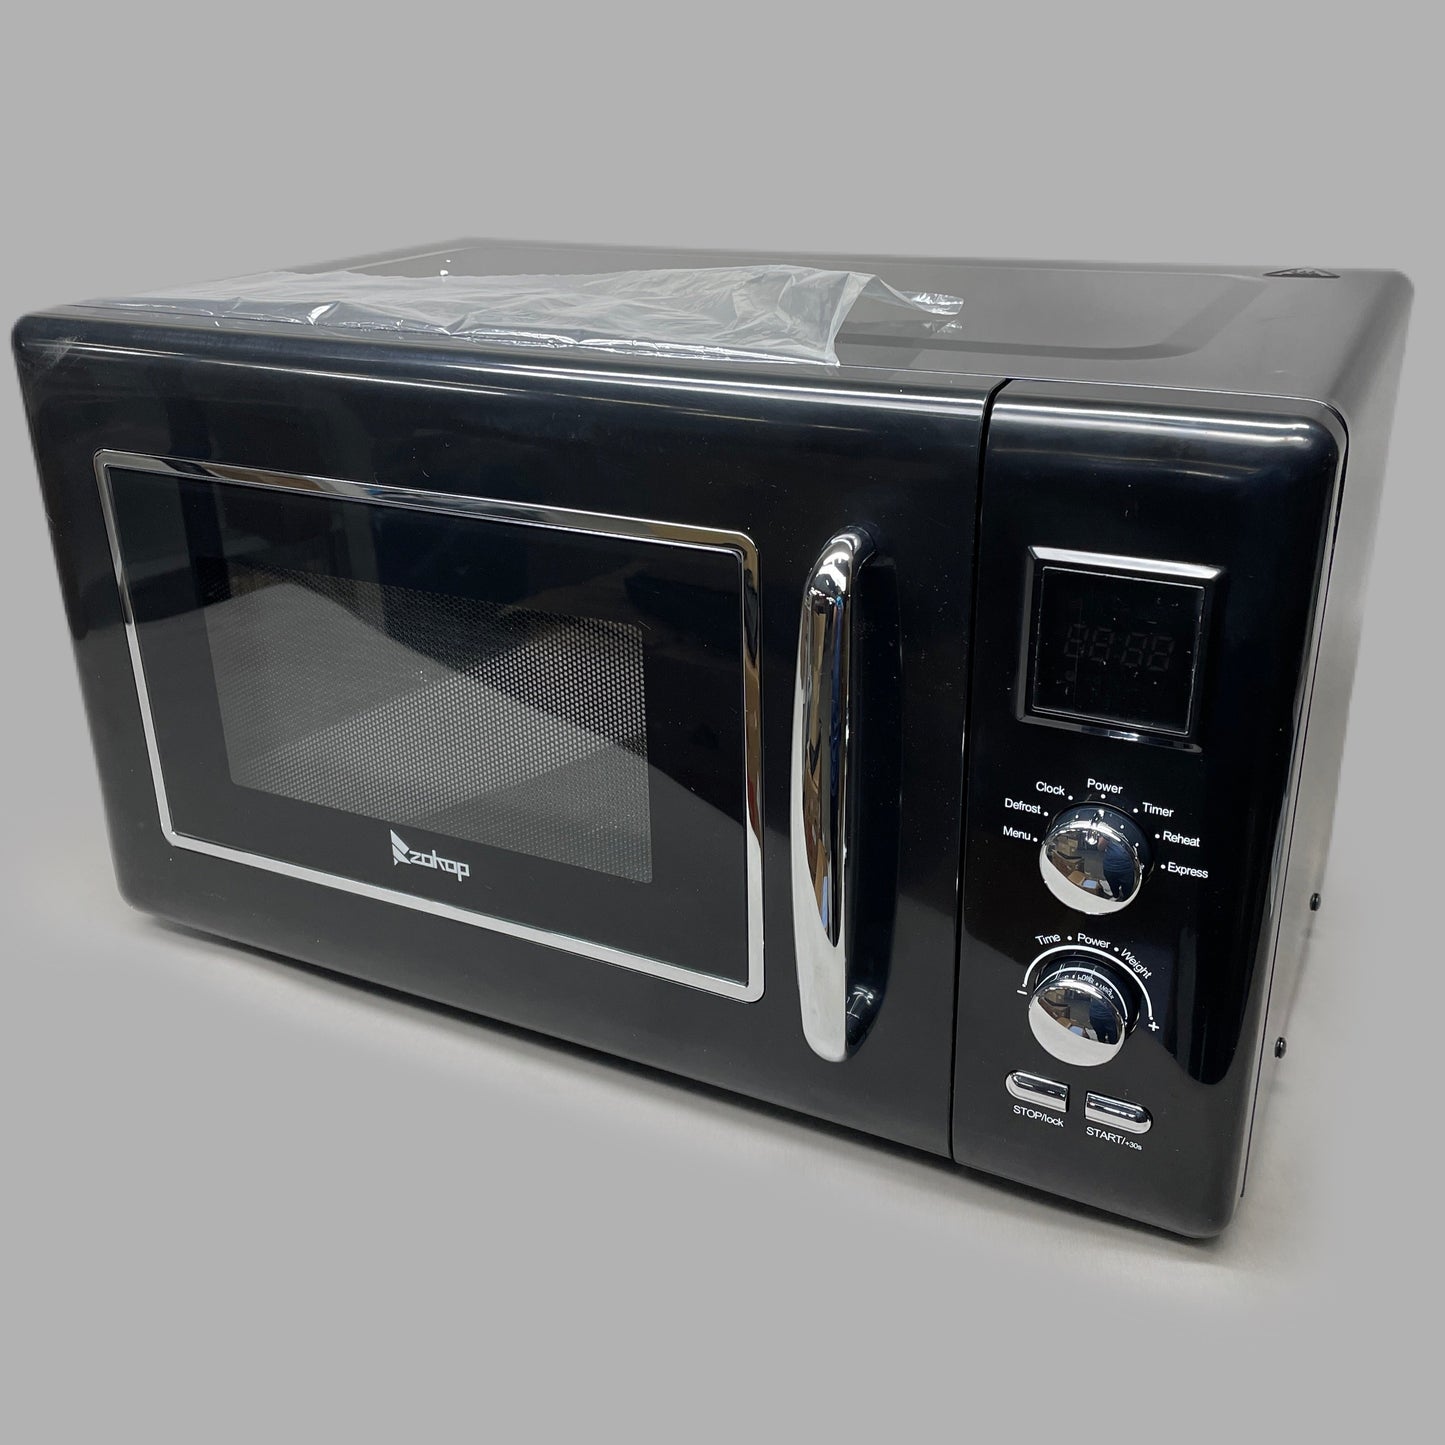 ZA@ ZOKOP Retro Microwave W/ Display and Silver Handle 900W B25UXP45-A90 (AS-IS, New, Open/Damaged-Box)